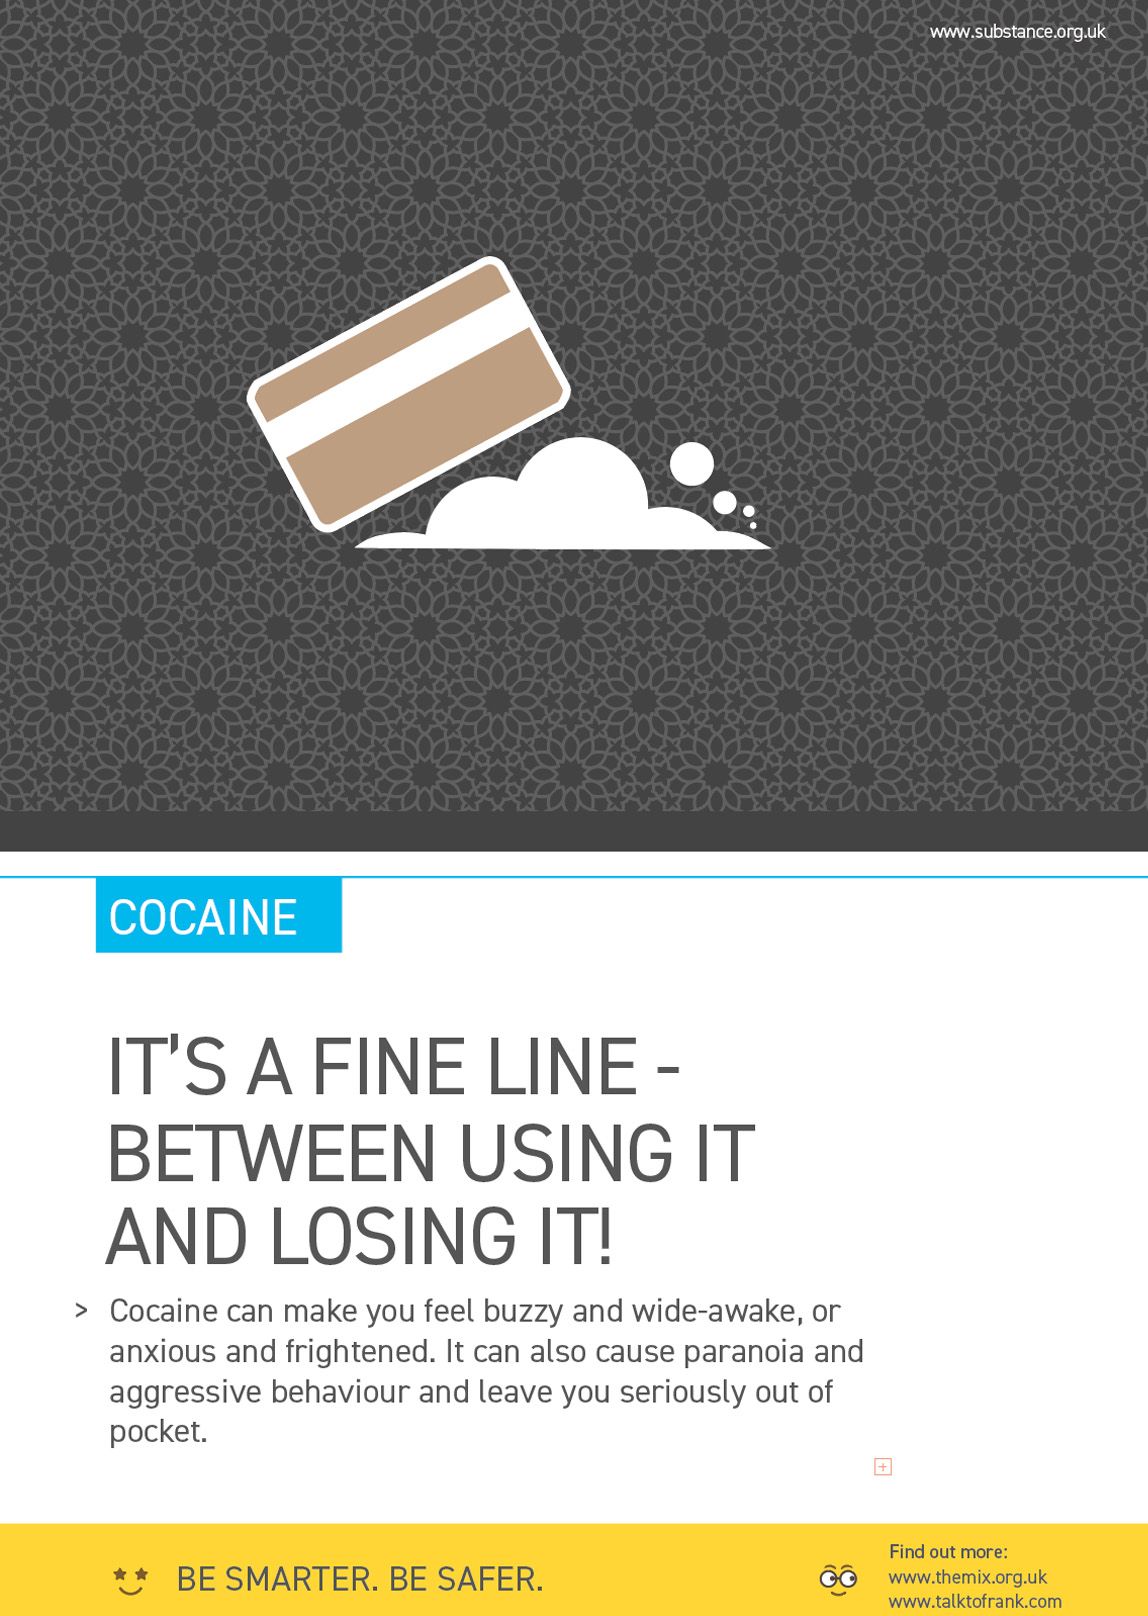 design for cocaine information poster